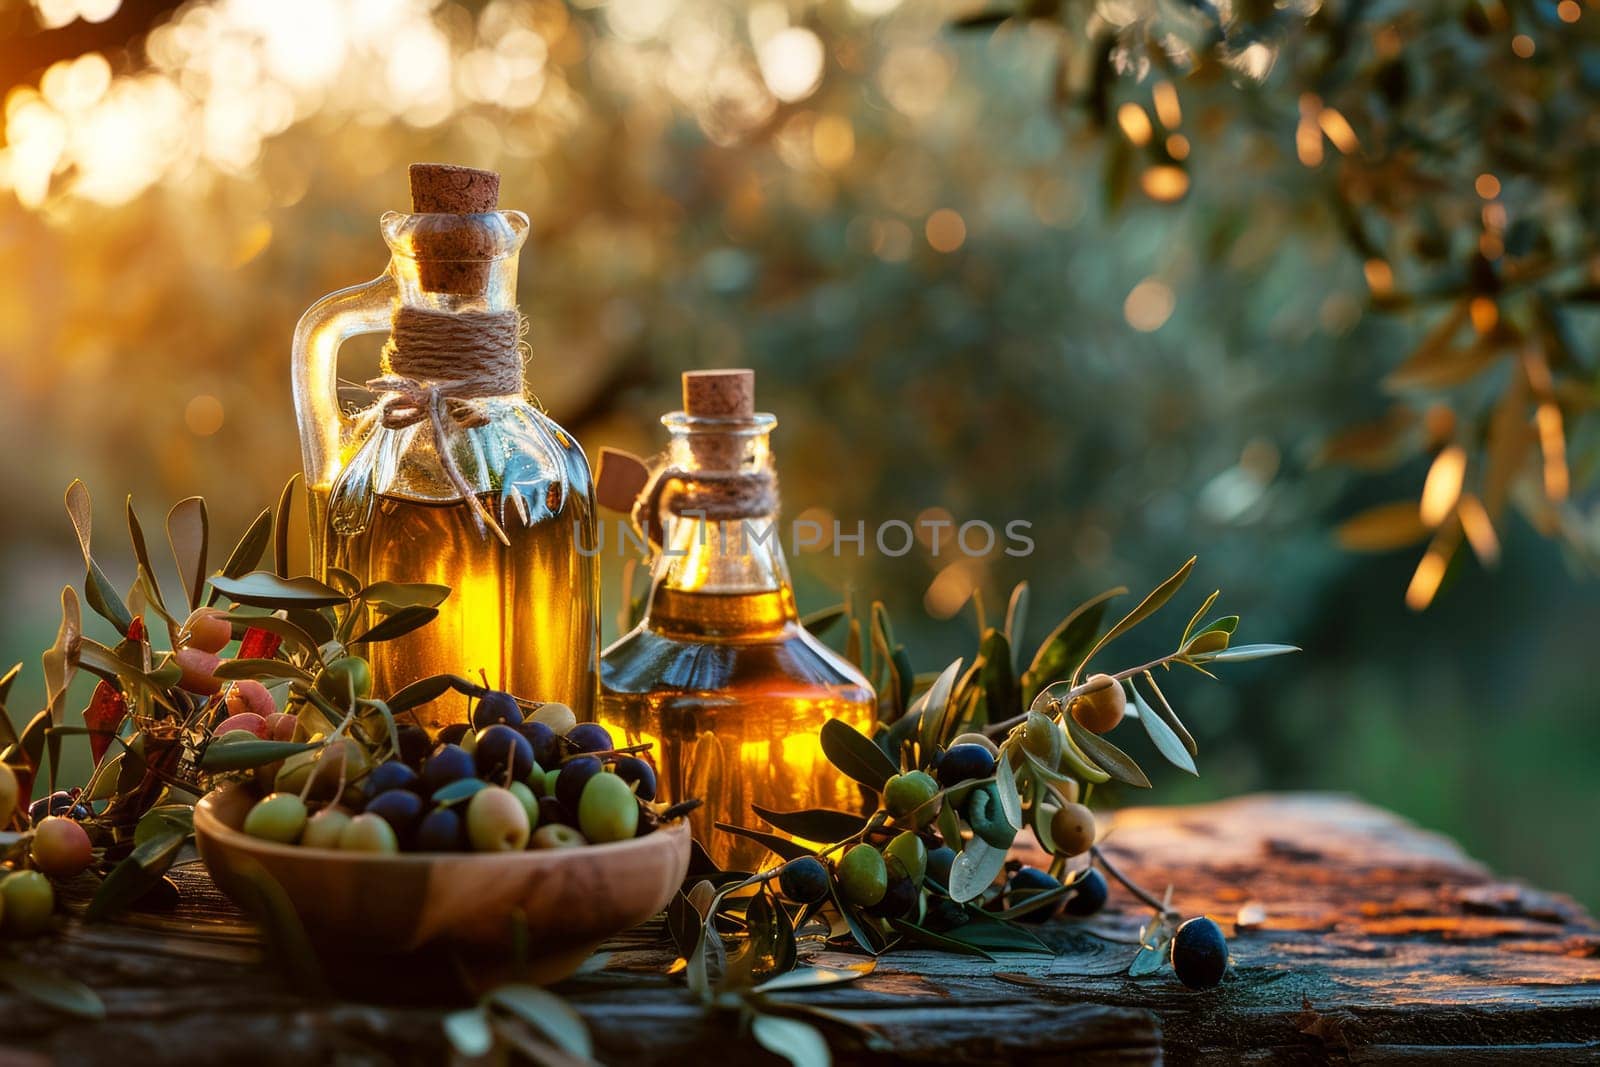 Golden olive oil bottles with olives leaves and fruits by rusak